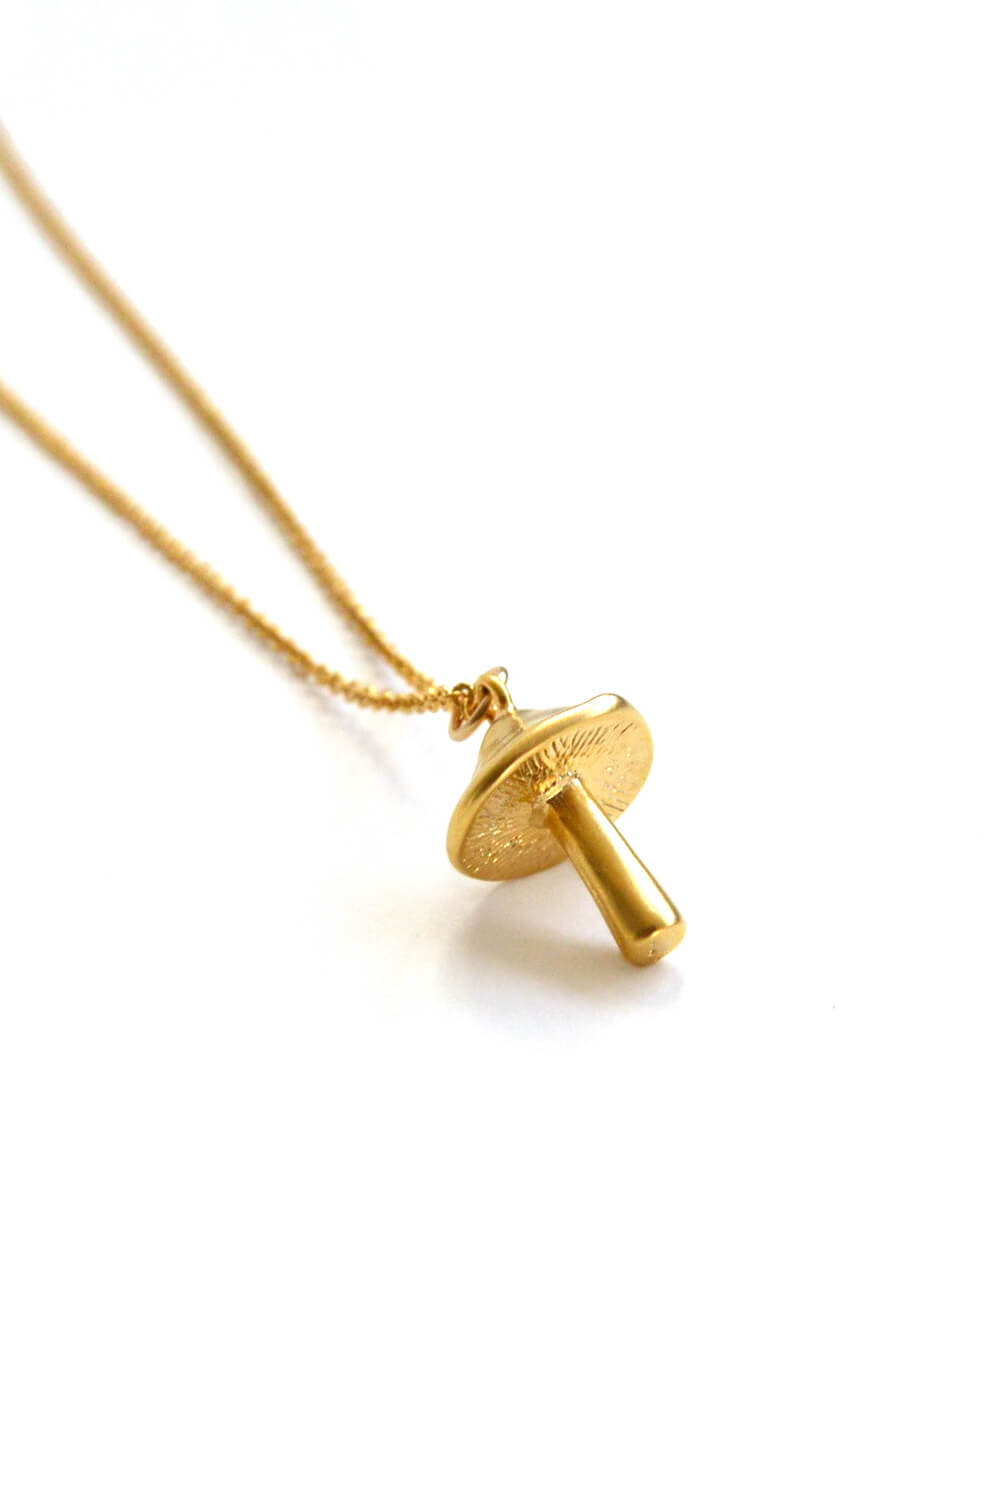 Gold Mushroom Charm Necklace For Sale | Paxton Gate